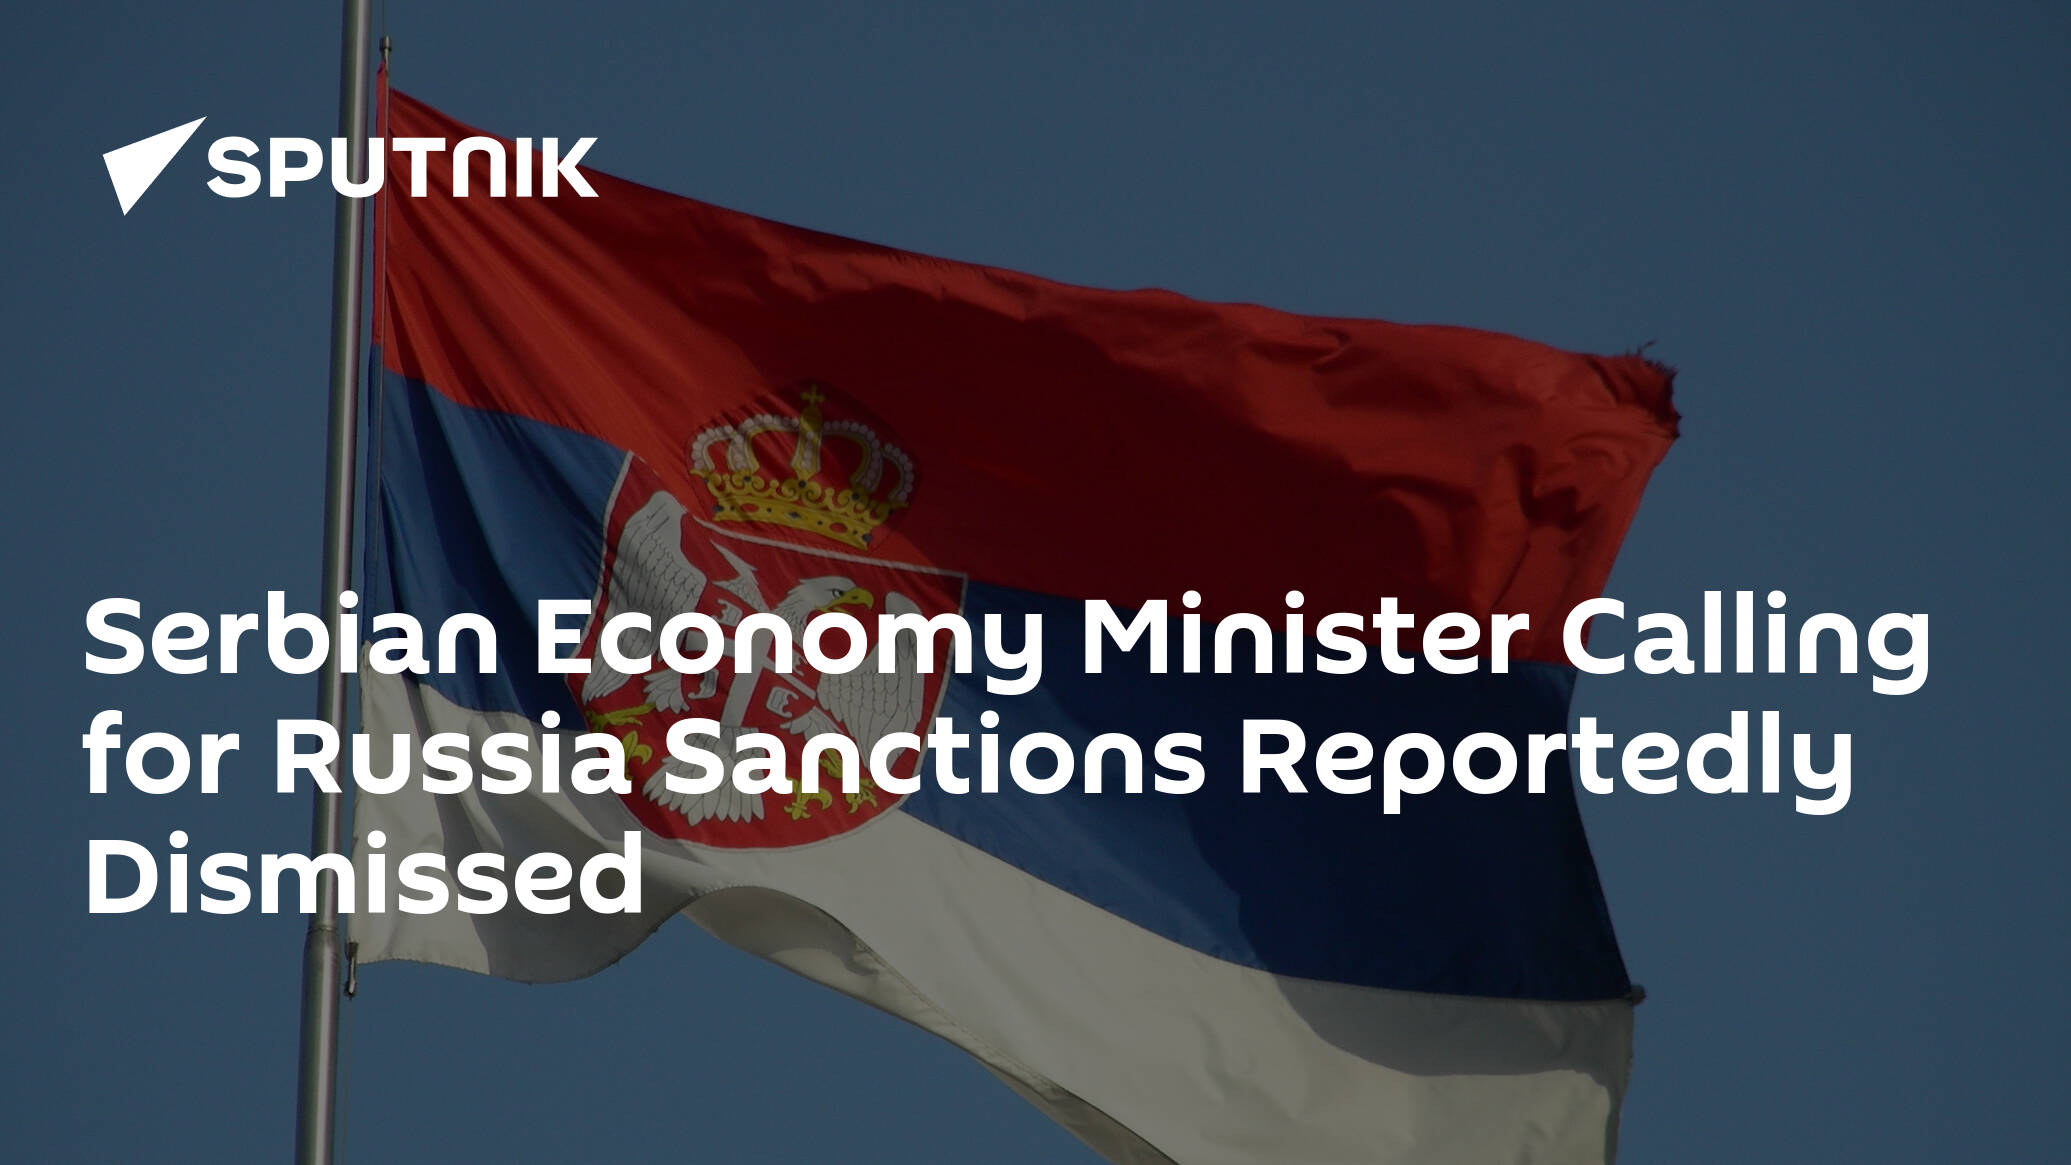 Serbian Economy Minister Calling for Russia Sanctions Reportedly Dismissed